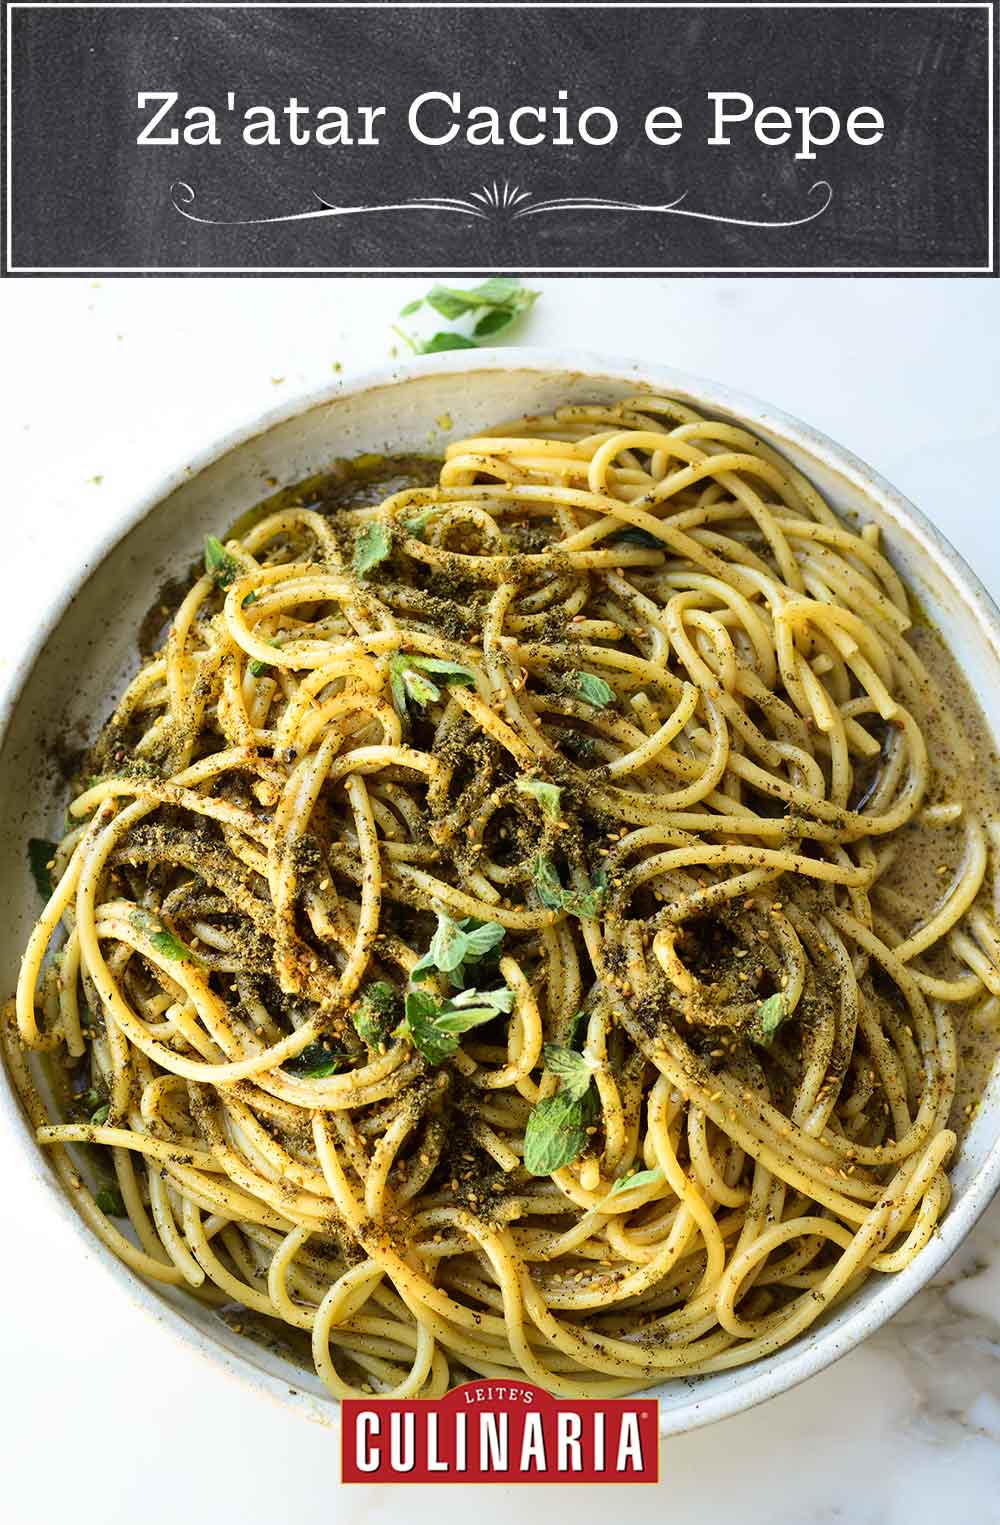 A ceramic bowl filled with za'atar cacio e pepe and topped with fresh marjoram leaves.